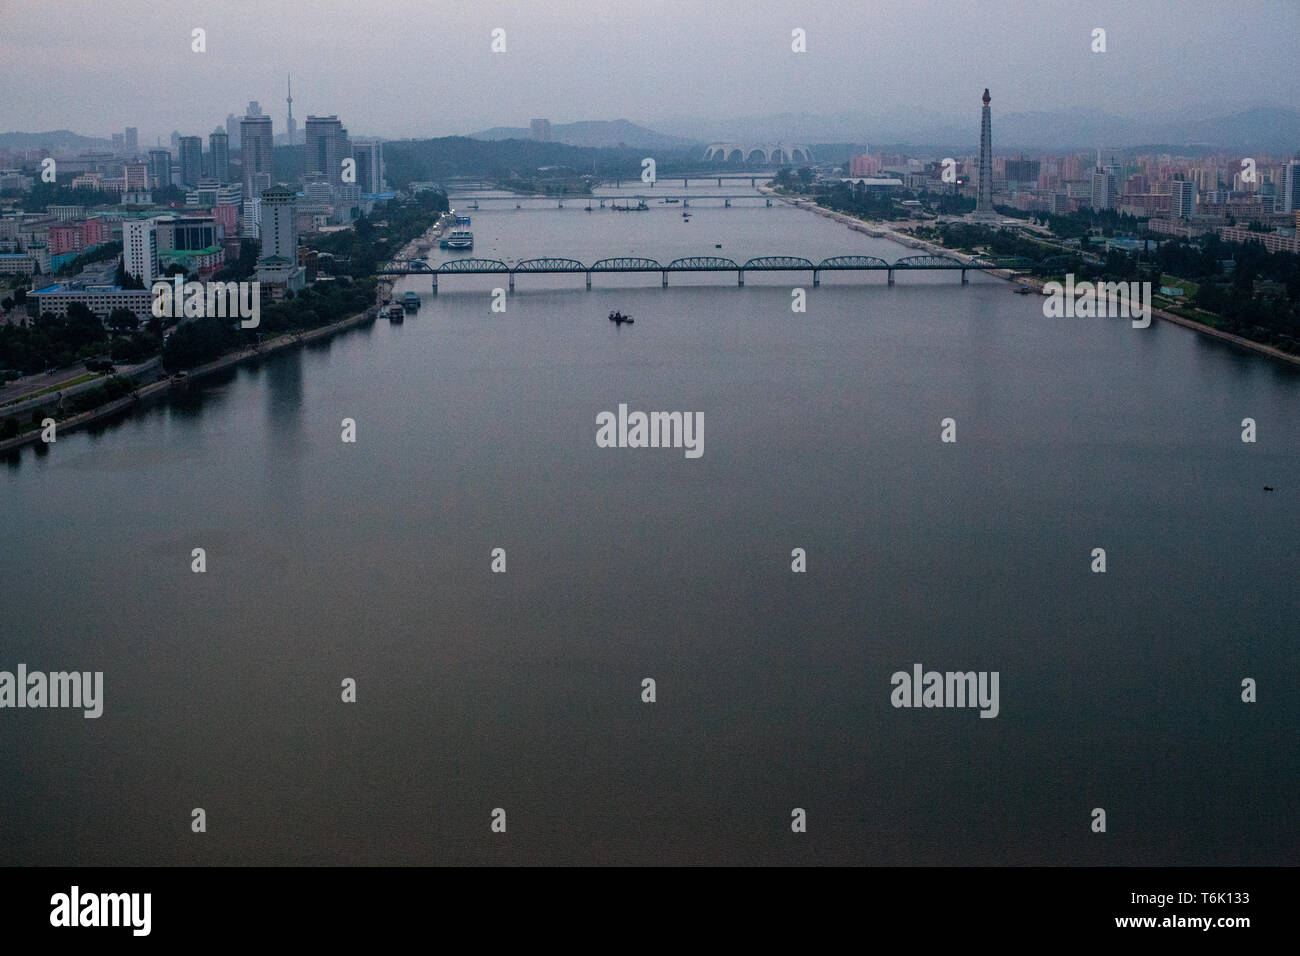 A view down the Taedong river in Pyongyang from the Yanggakdo Hotel. The Juche Idea Tower is on the right. Stock Photo